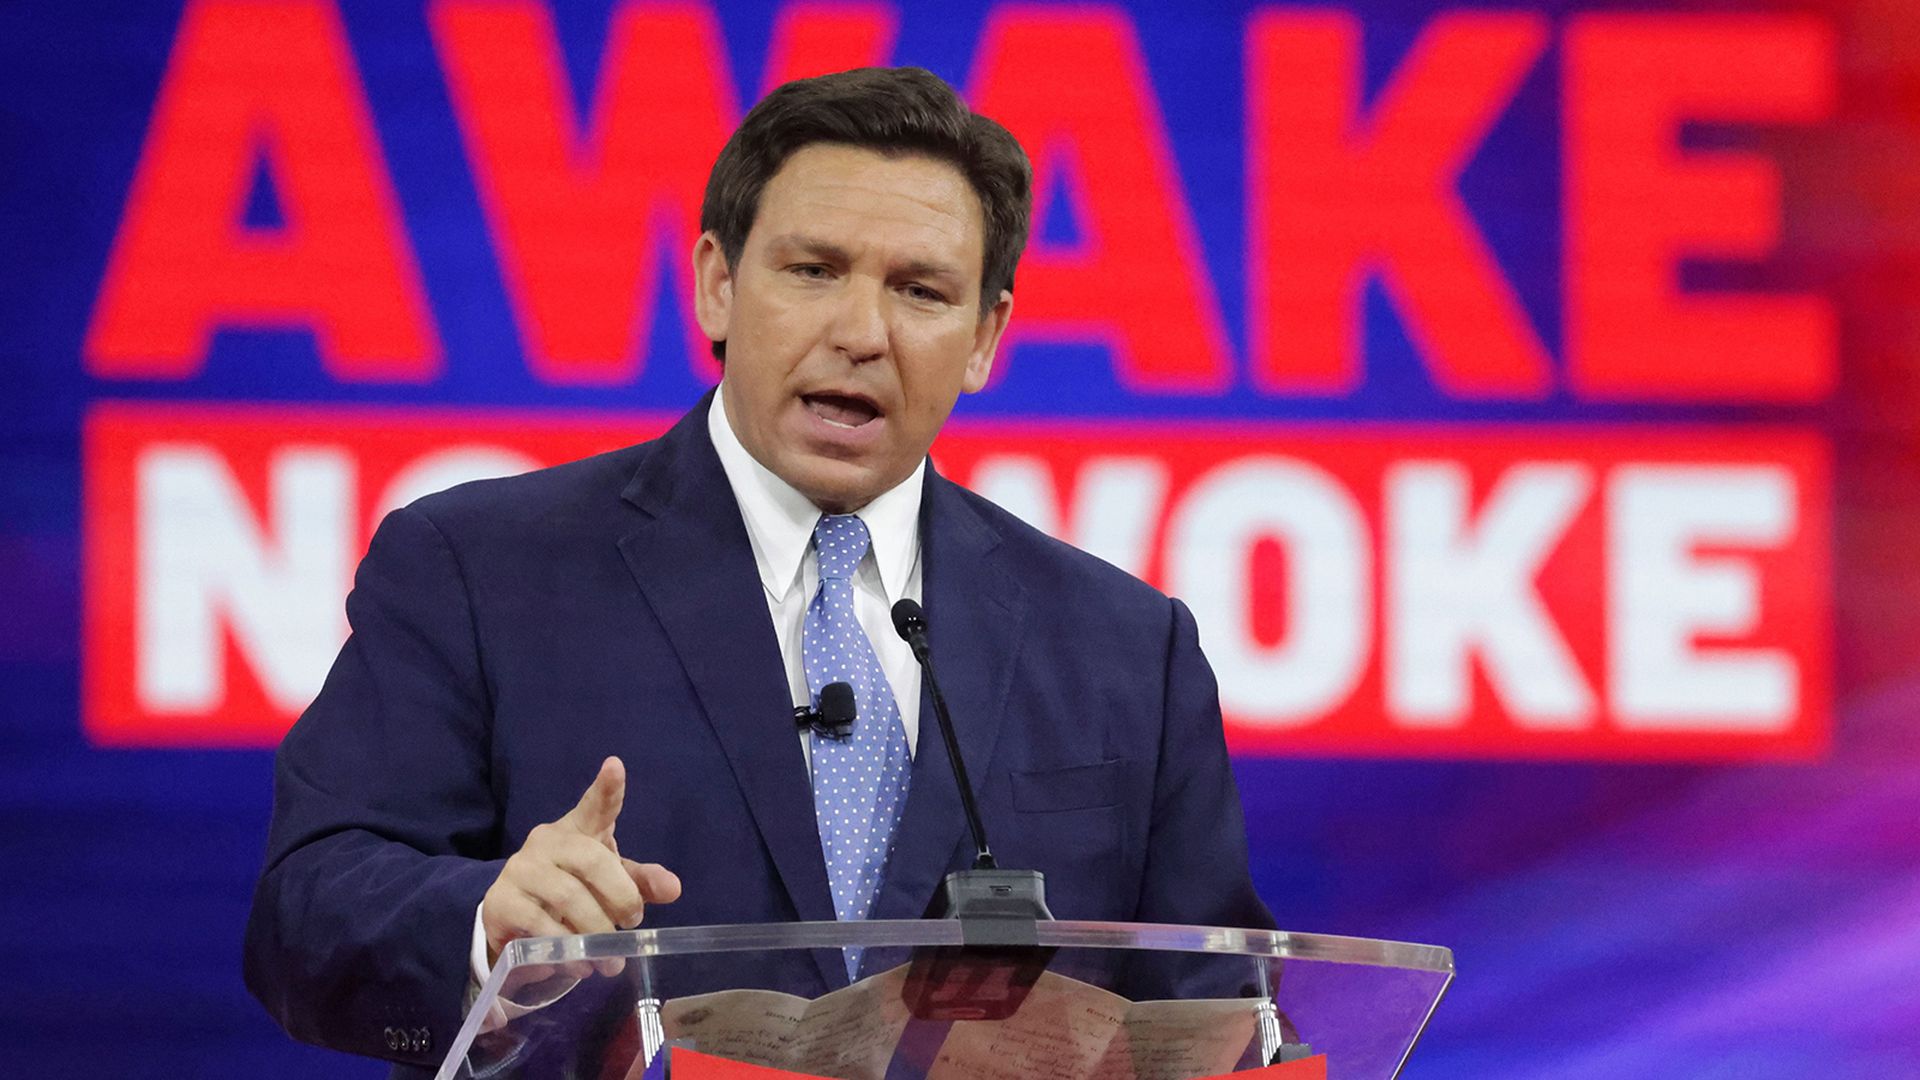 Photo of Ron DeSantis speaking from a podium on a stage